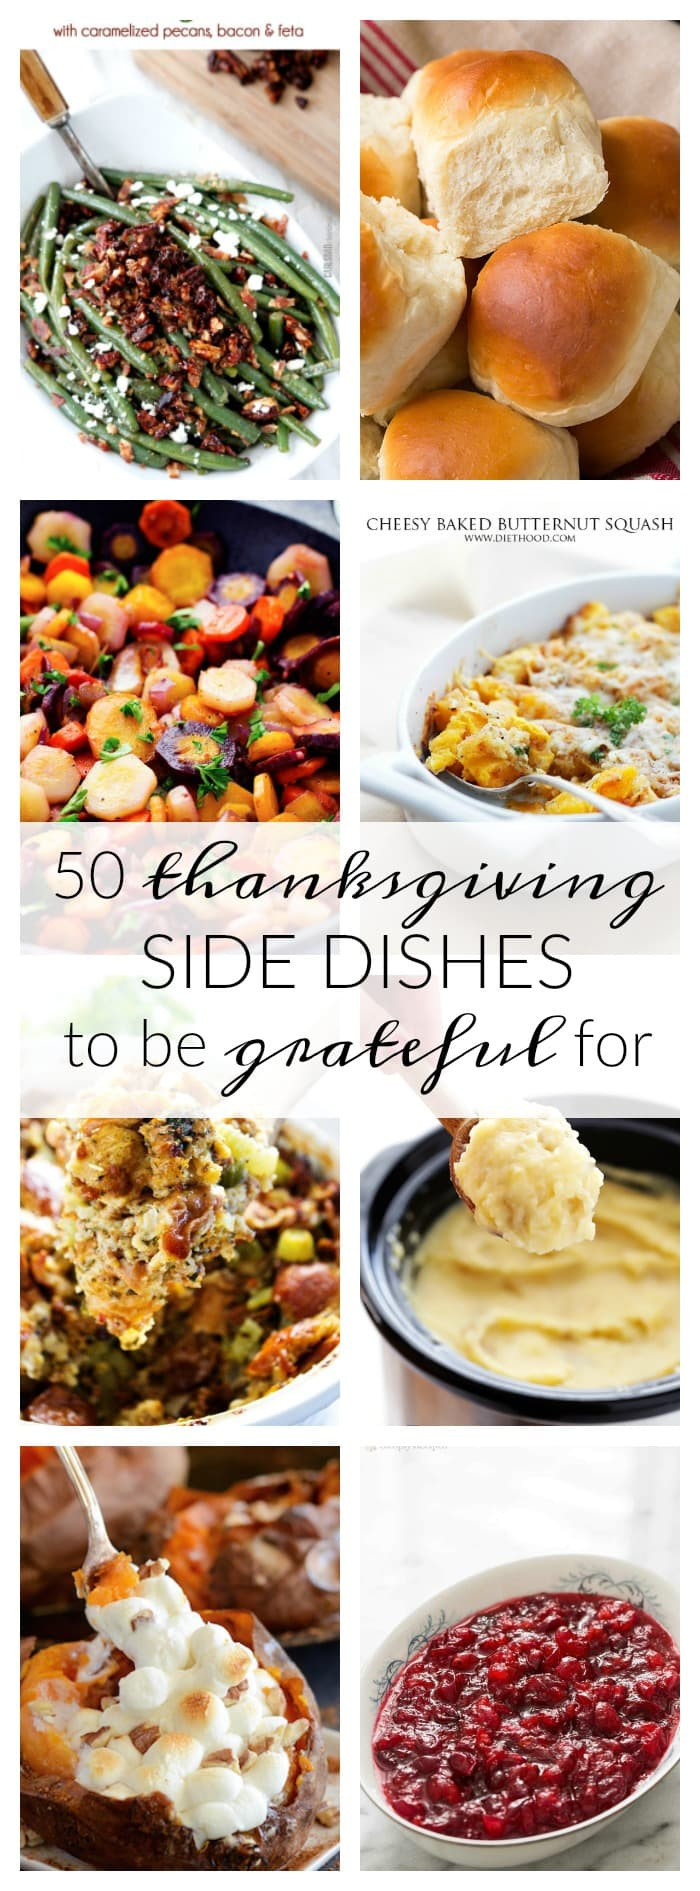 Italian Thanksgiving Side Dishes
 50 Thanksgiving Side Dishes To Be Grateful For A Dash of